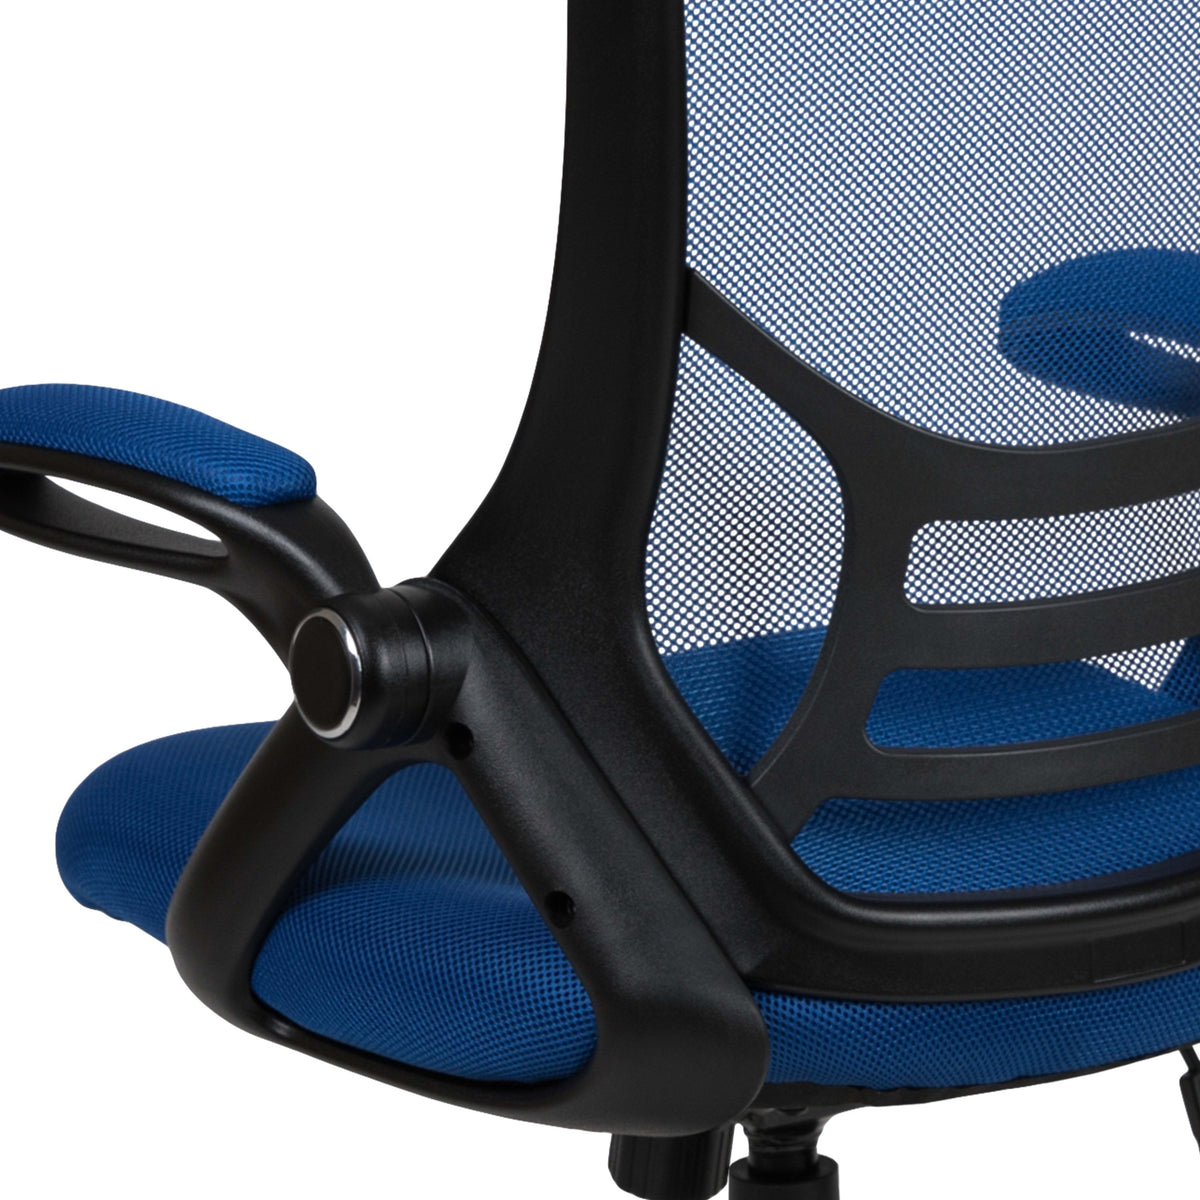 Blue |#| High Back Blue Mesh Ergonomic Office Chair with Black Frame and Flip-up Arms